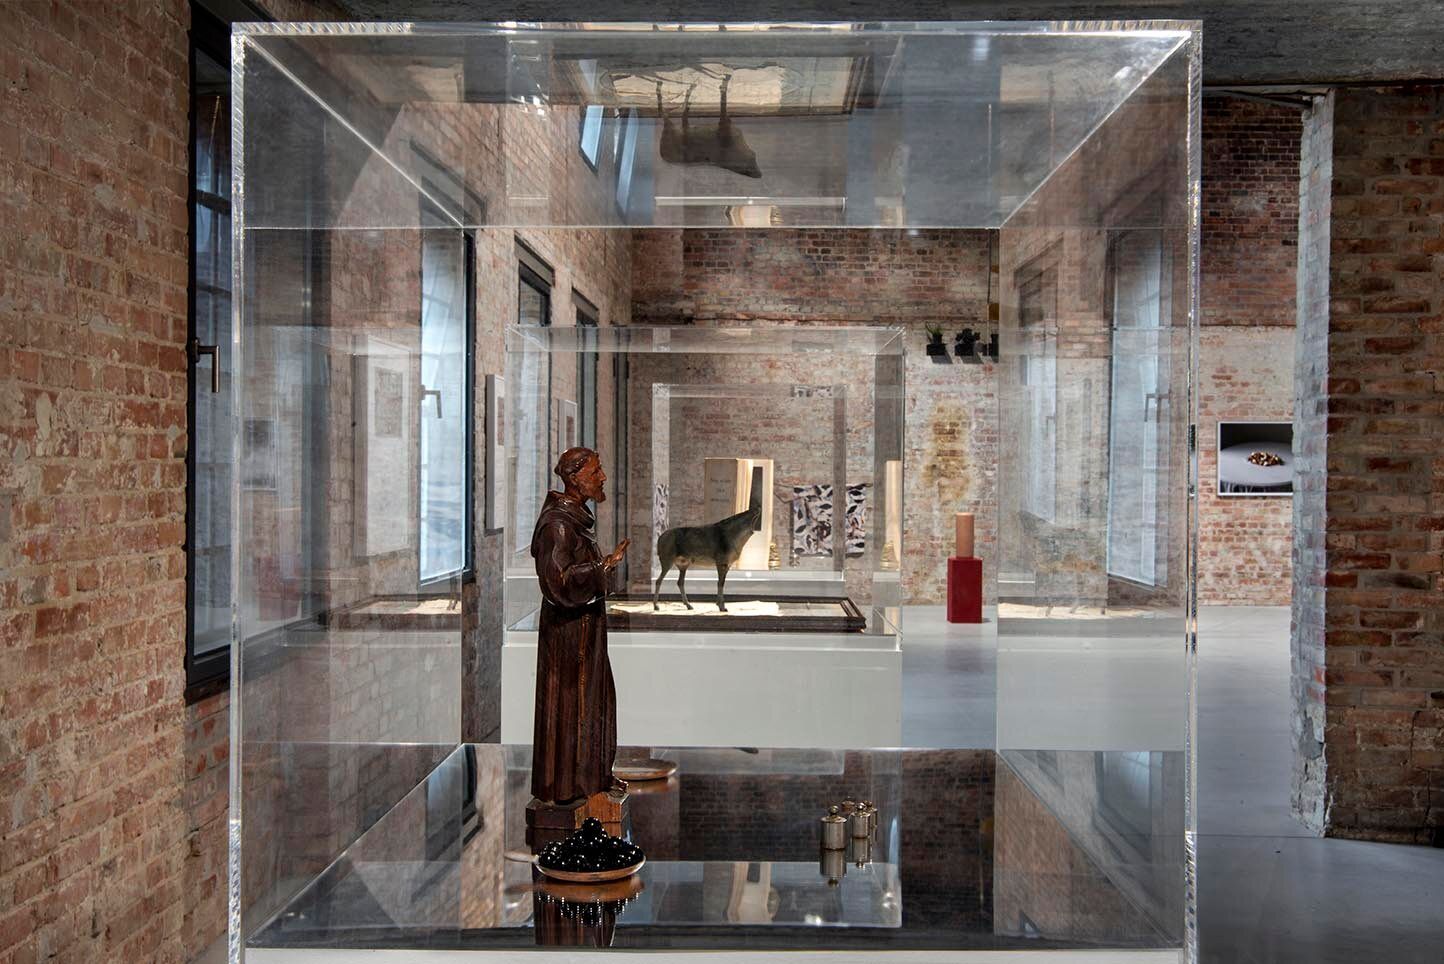 A human figurine of a catholic monkwith smaller items place around him showcased in a gallery space with walls made of bricks.